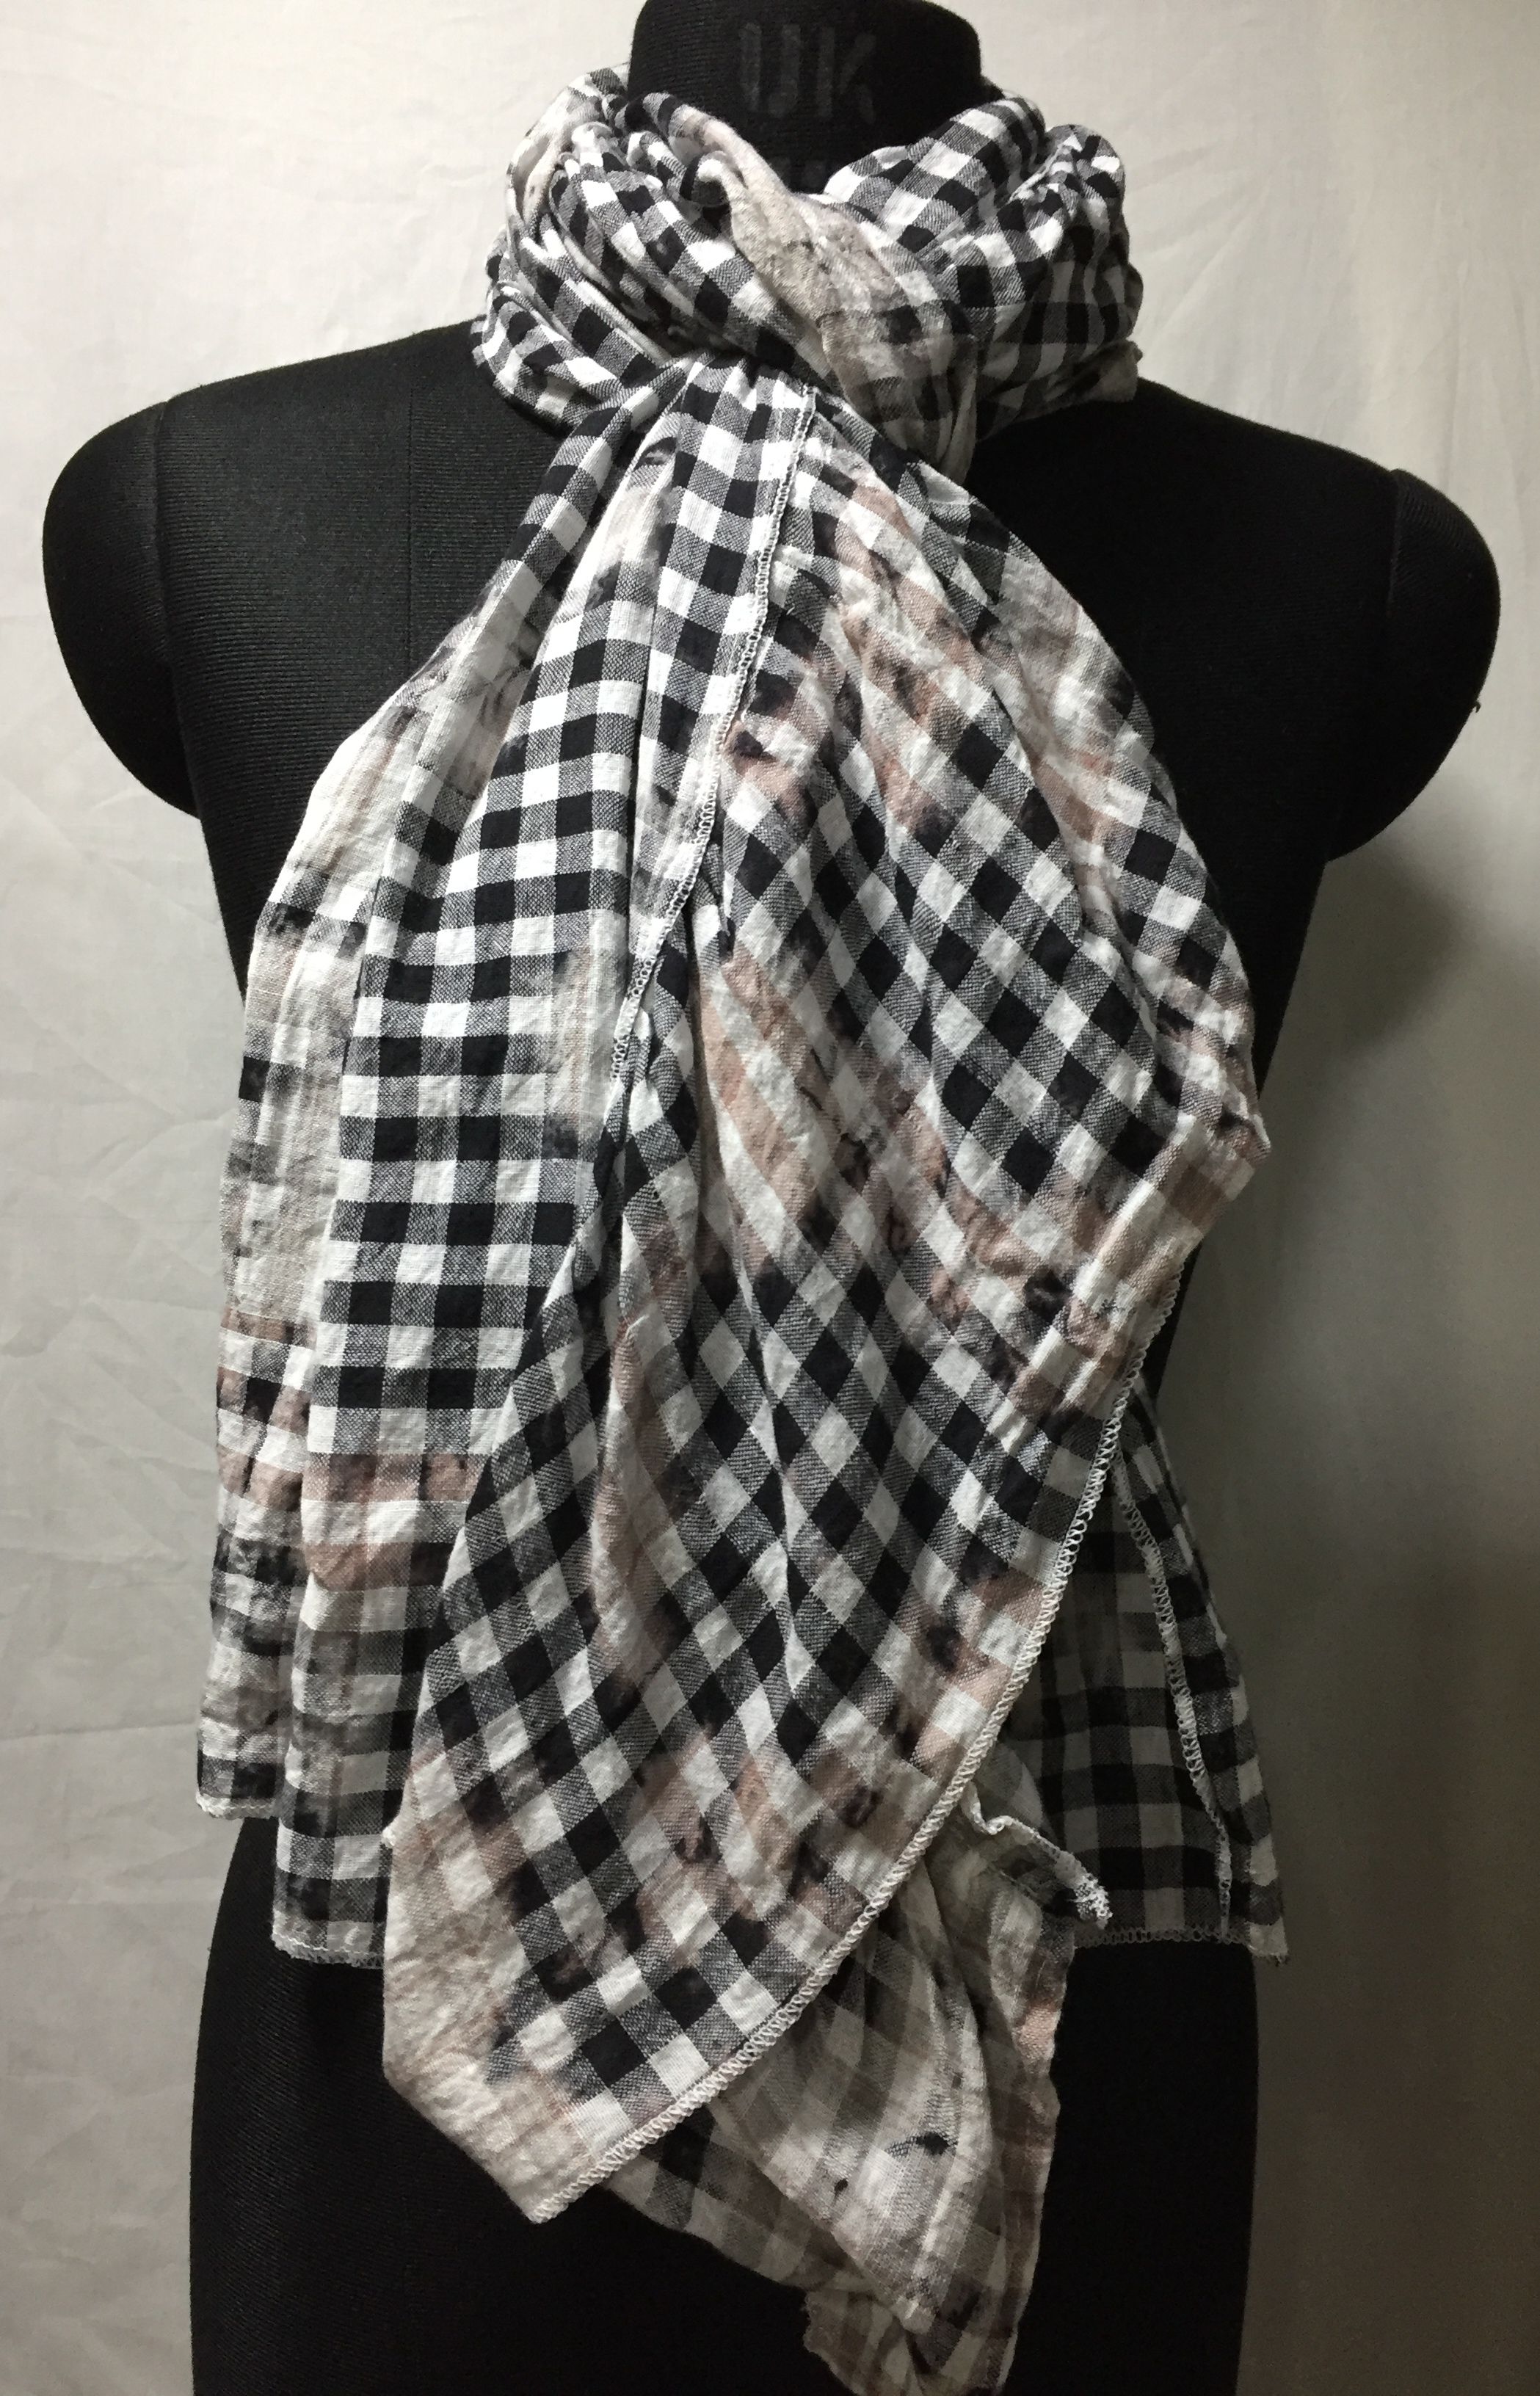 châle Black Cotton Scarves: Buy Online at Low Price in India - Snapdeal